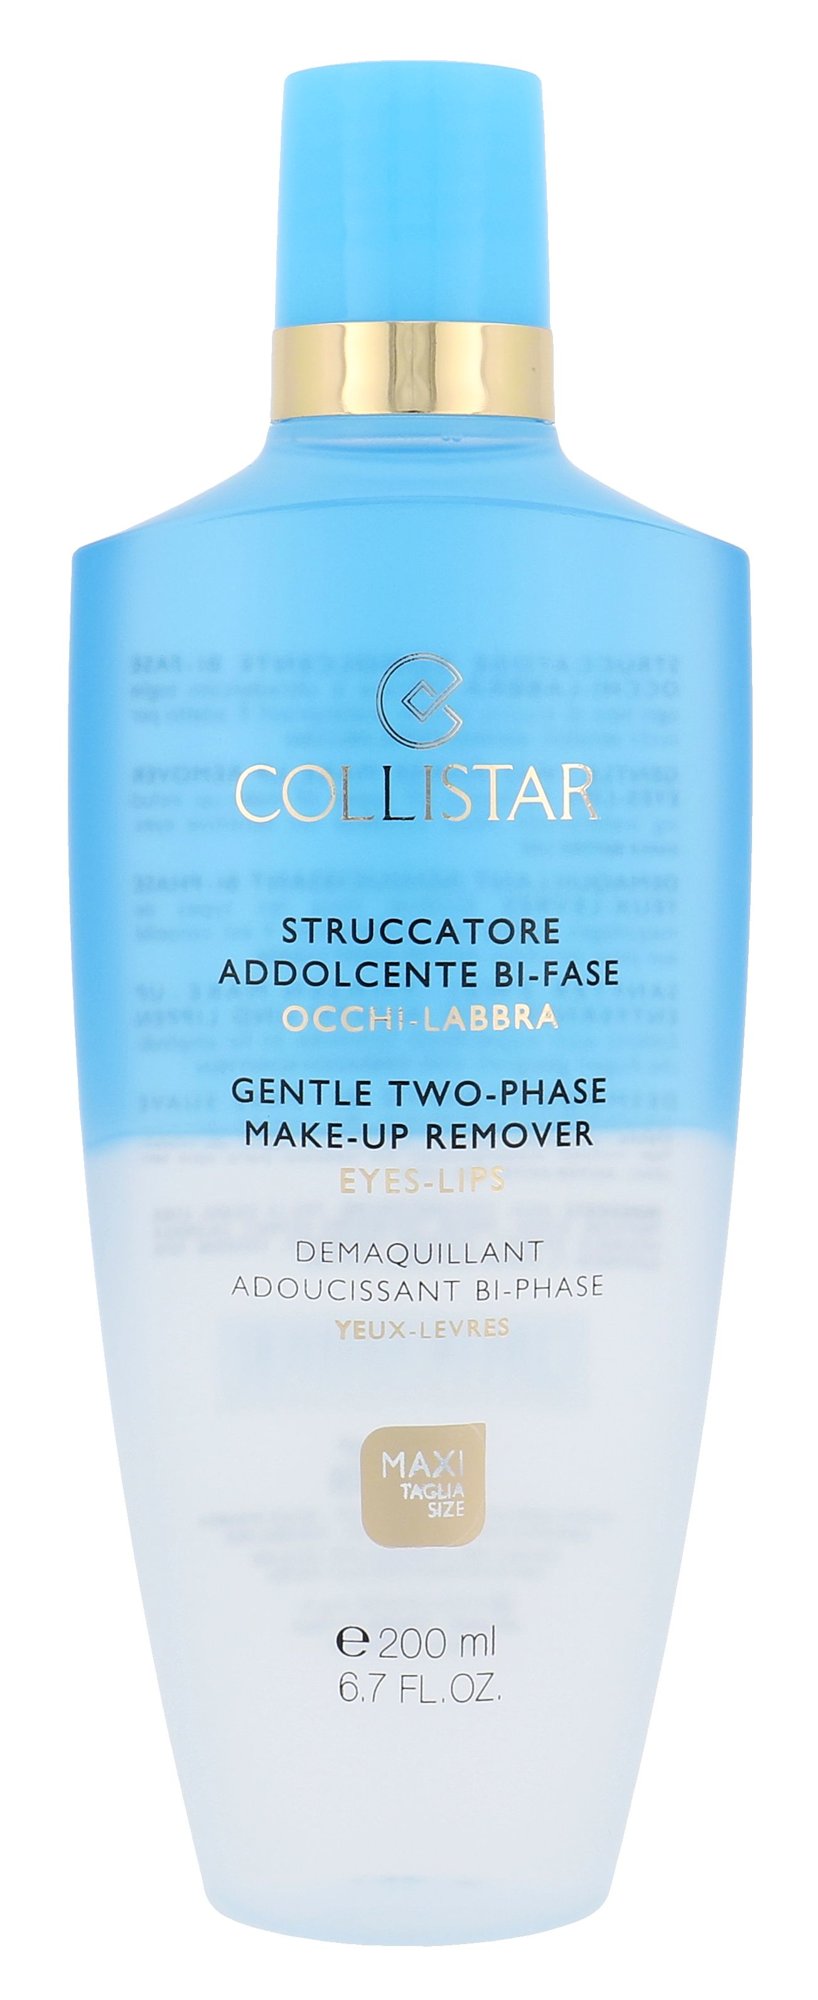 Collistar Gentle Two Phase Make-Up Remover